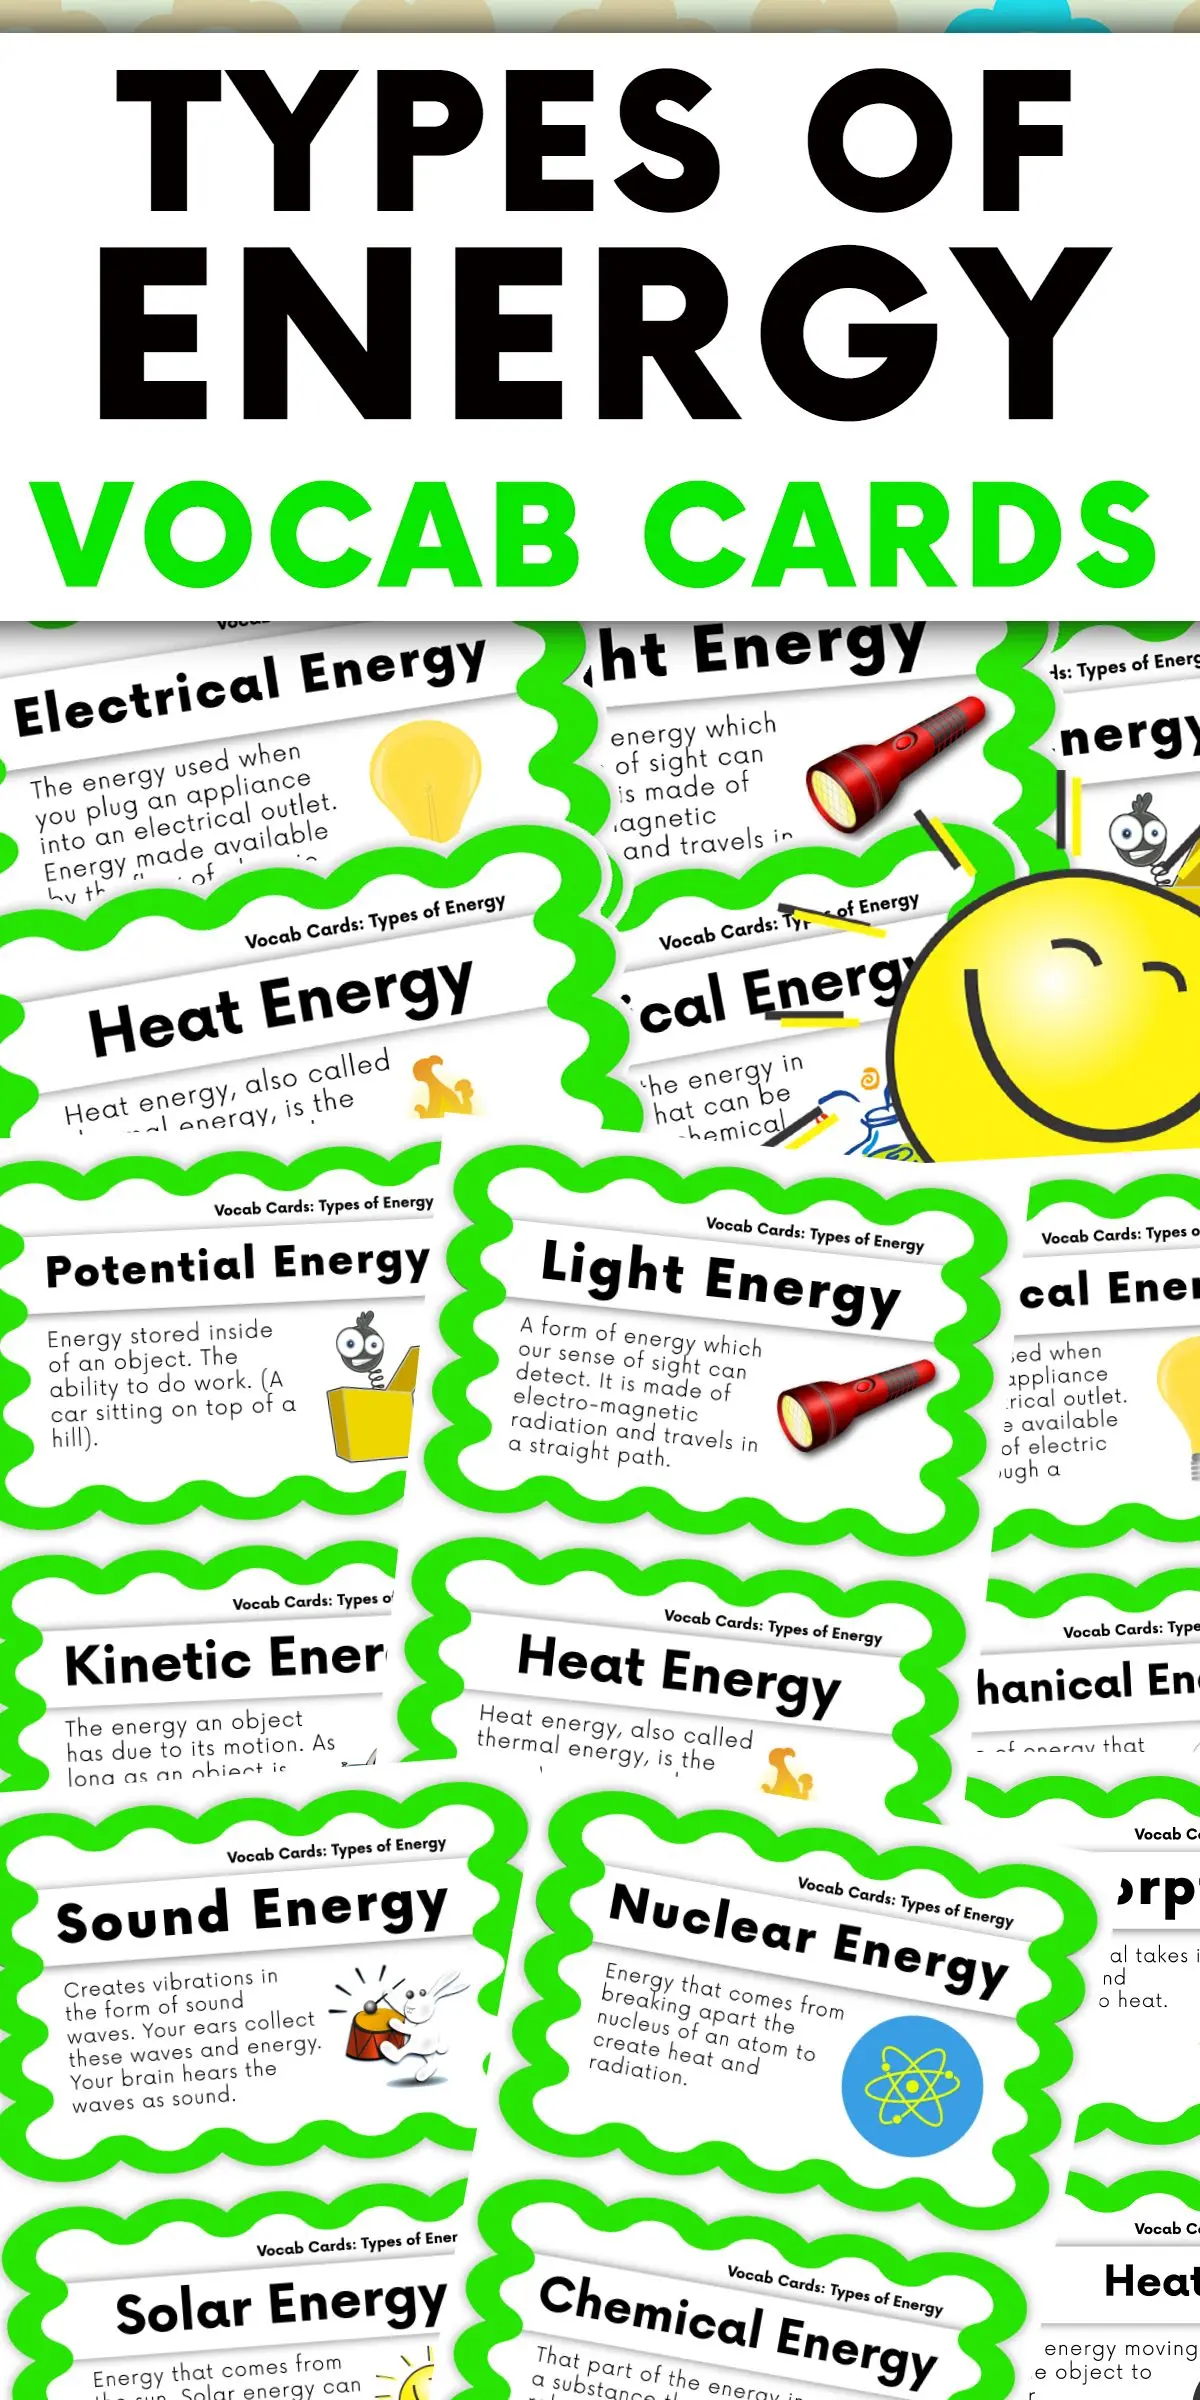 solar energy vocabulary - What are the terms used to describe solar energy